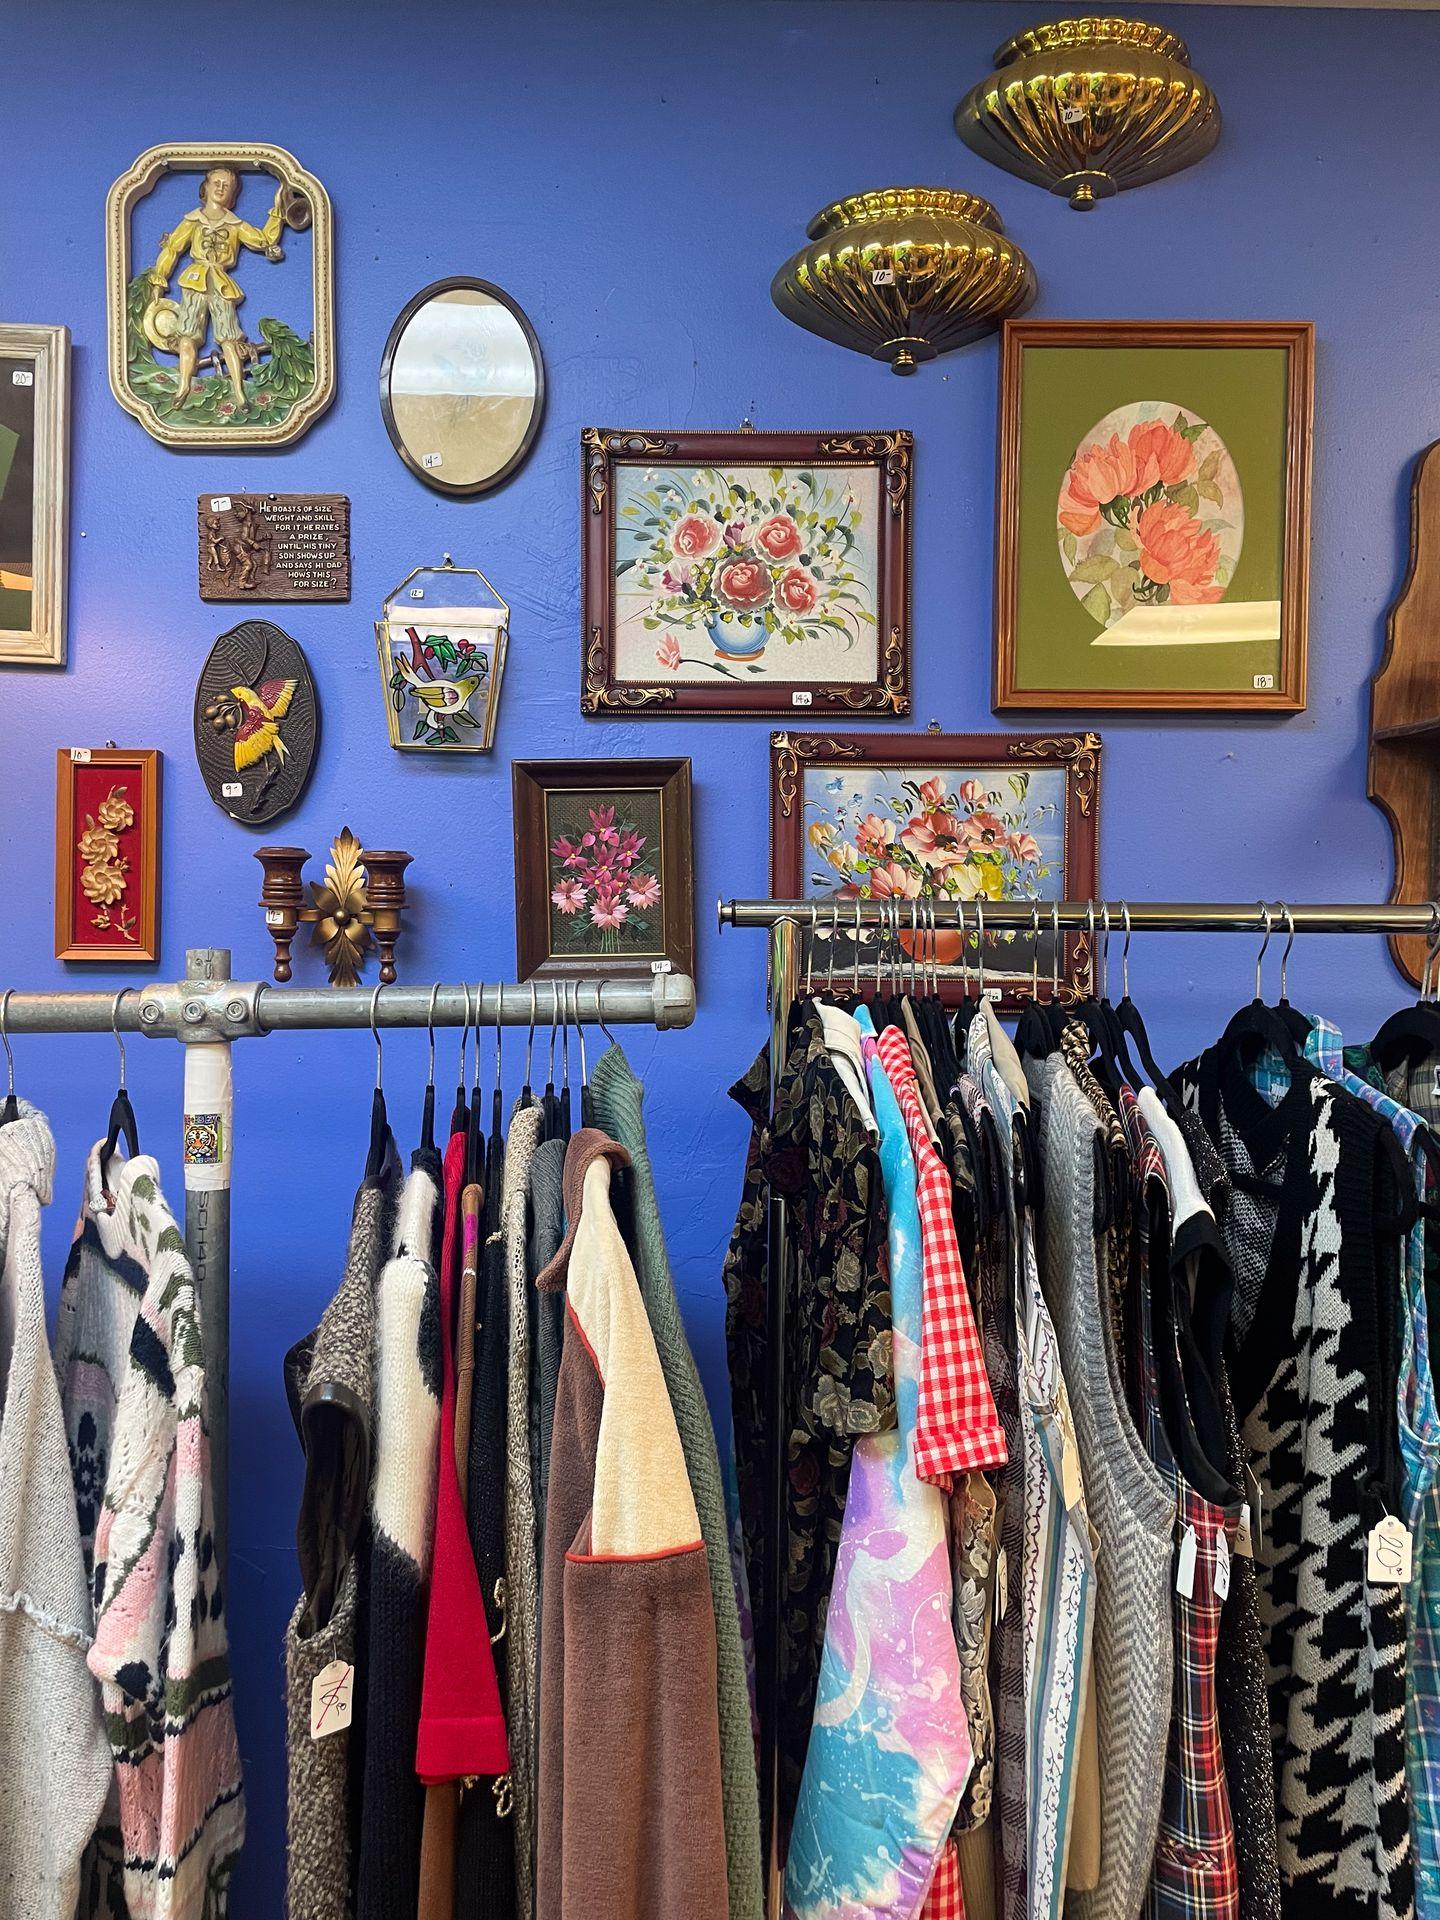 Two racks of vintage clothing. The background wall is blue with artwork hanging.